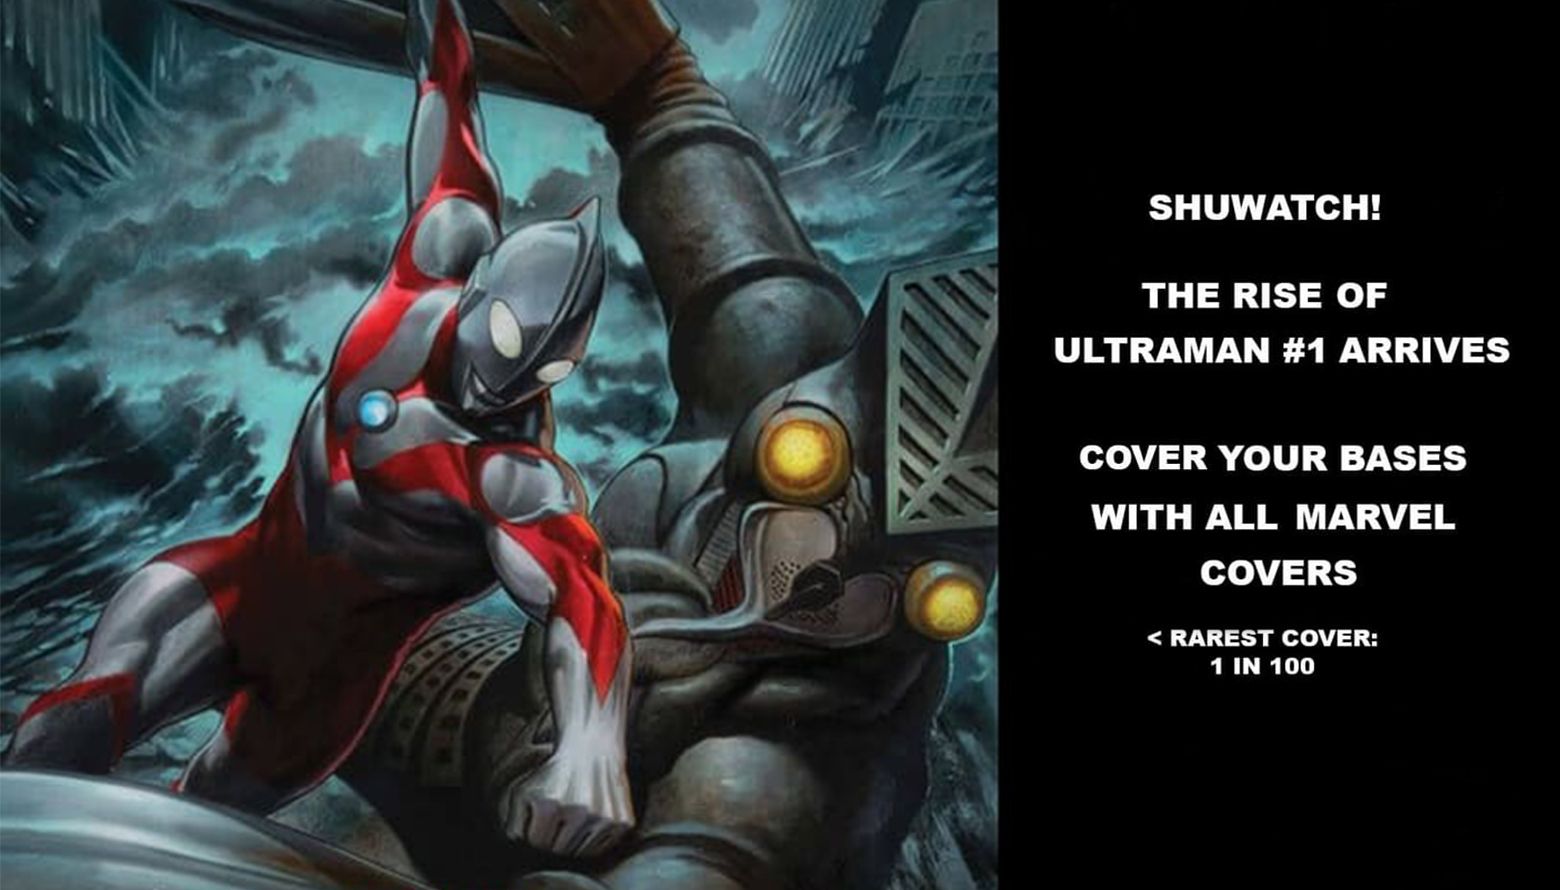 SHUWATCH! THE RISE OF ULTRAMAN #1 ARRIVESCOVER YOUR BASES WITH ALL MARVEL COVERS